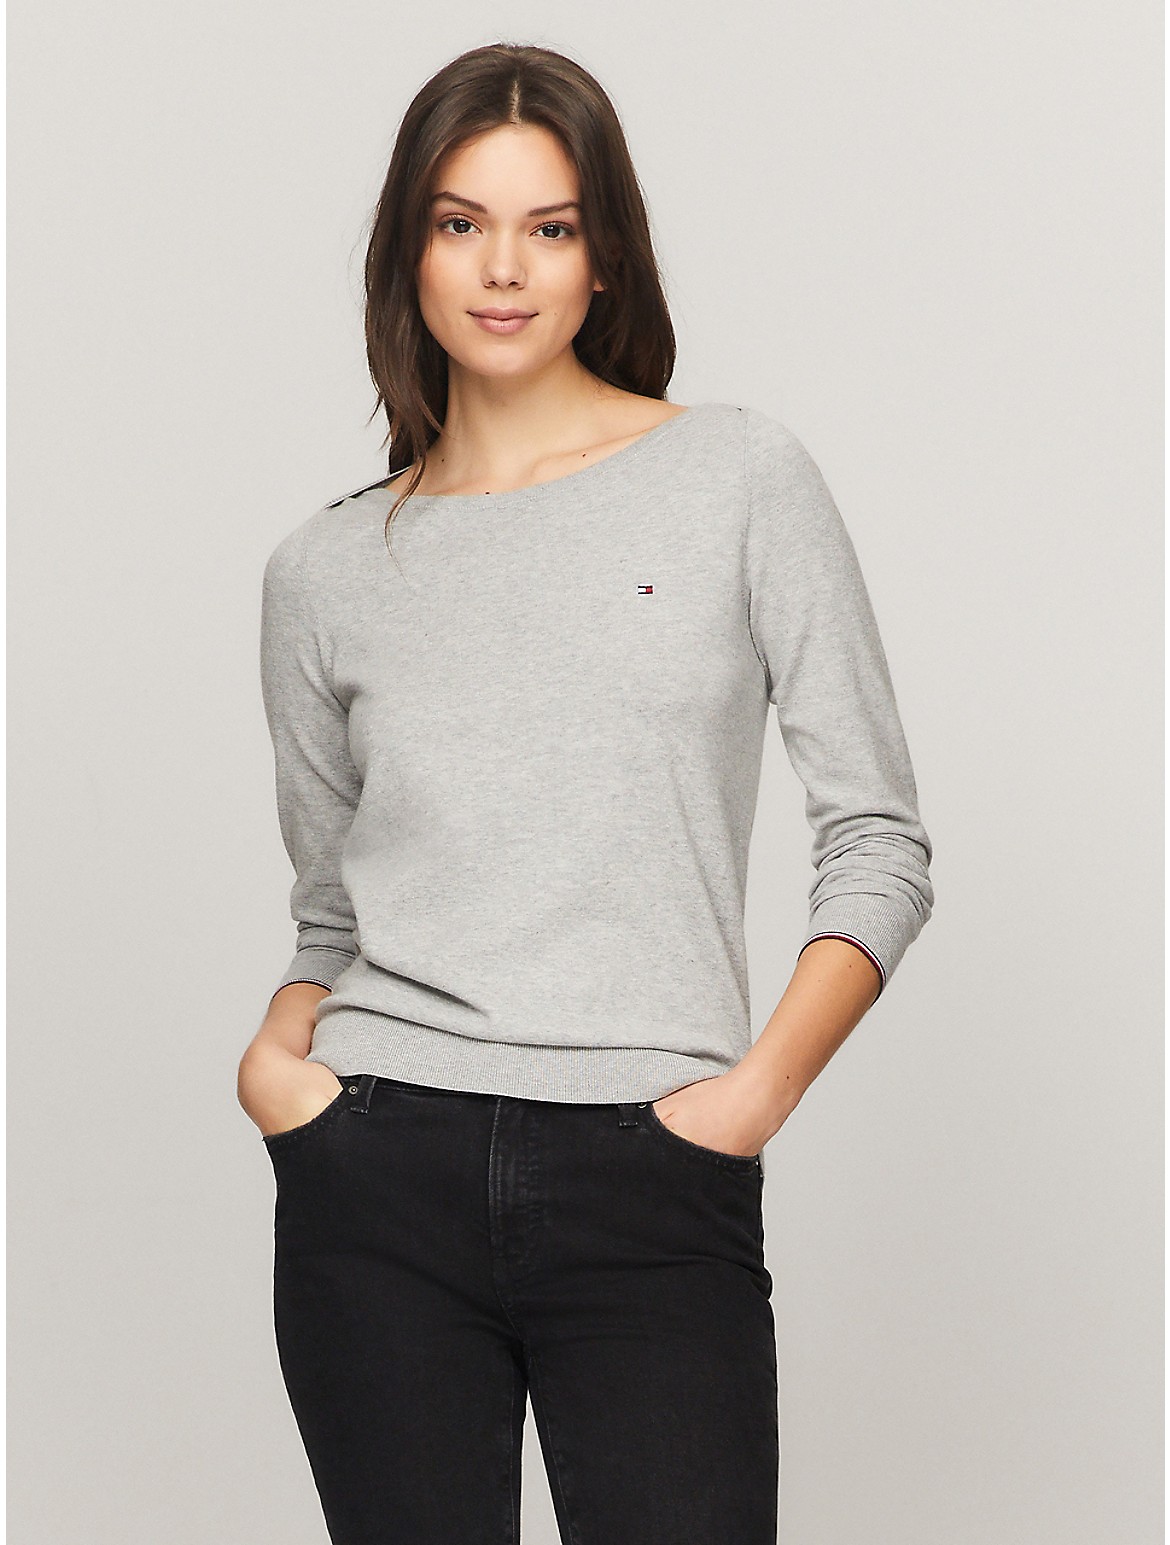 Tommy Hilfiger Solid Boat Neck Sweater In Light Grey Heather